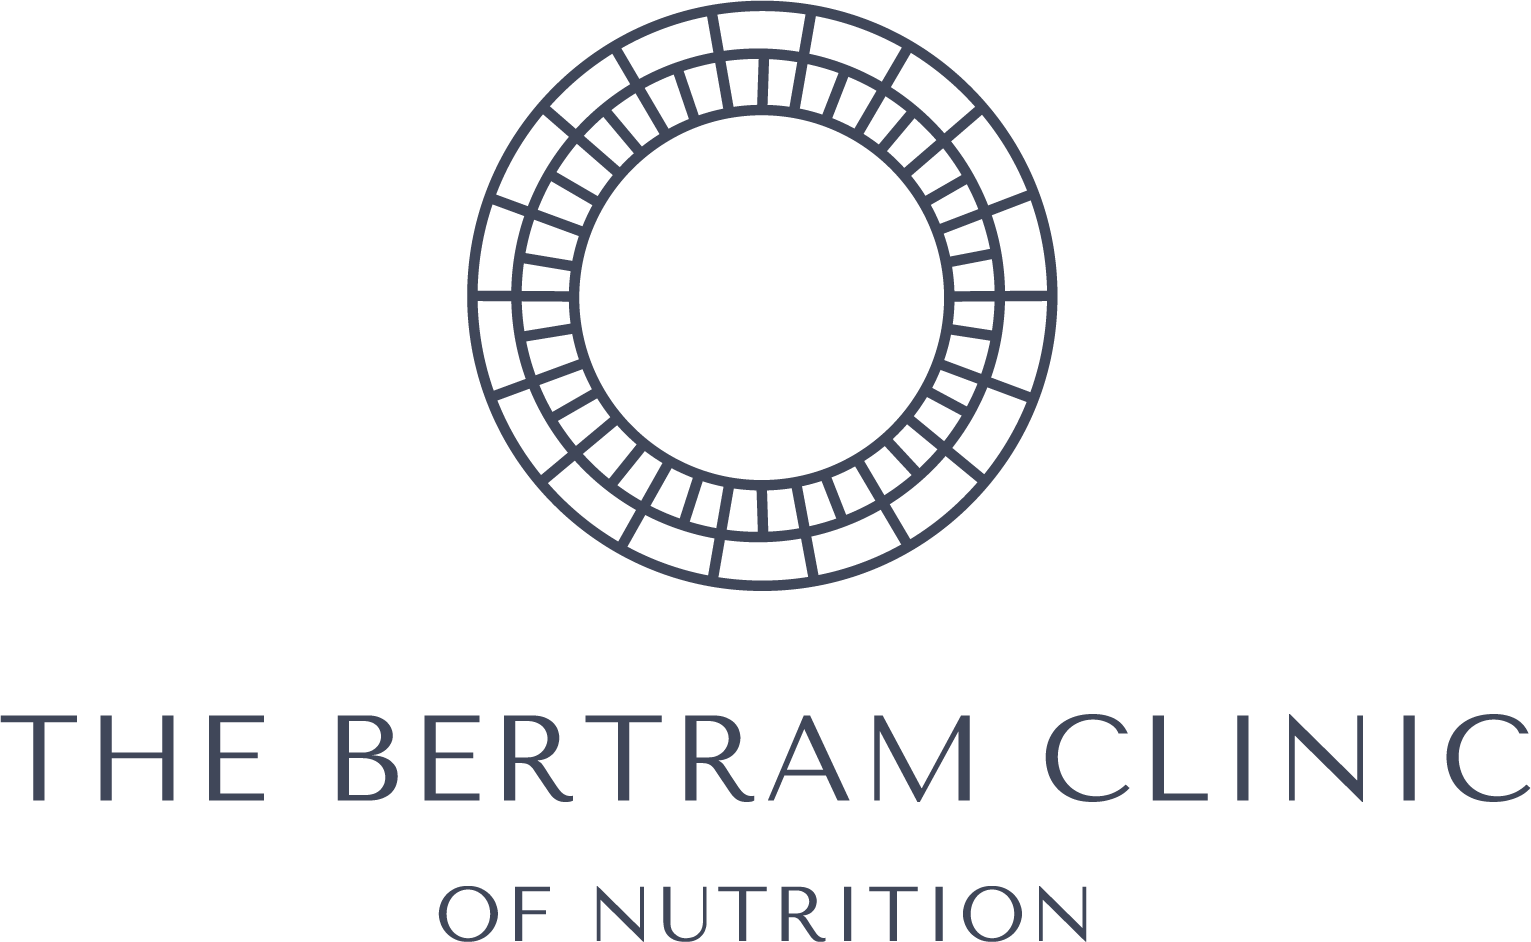 The Bertram Clinic of Nutrition